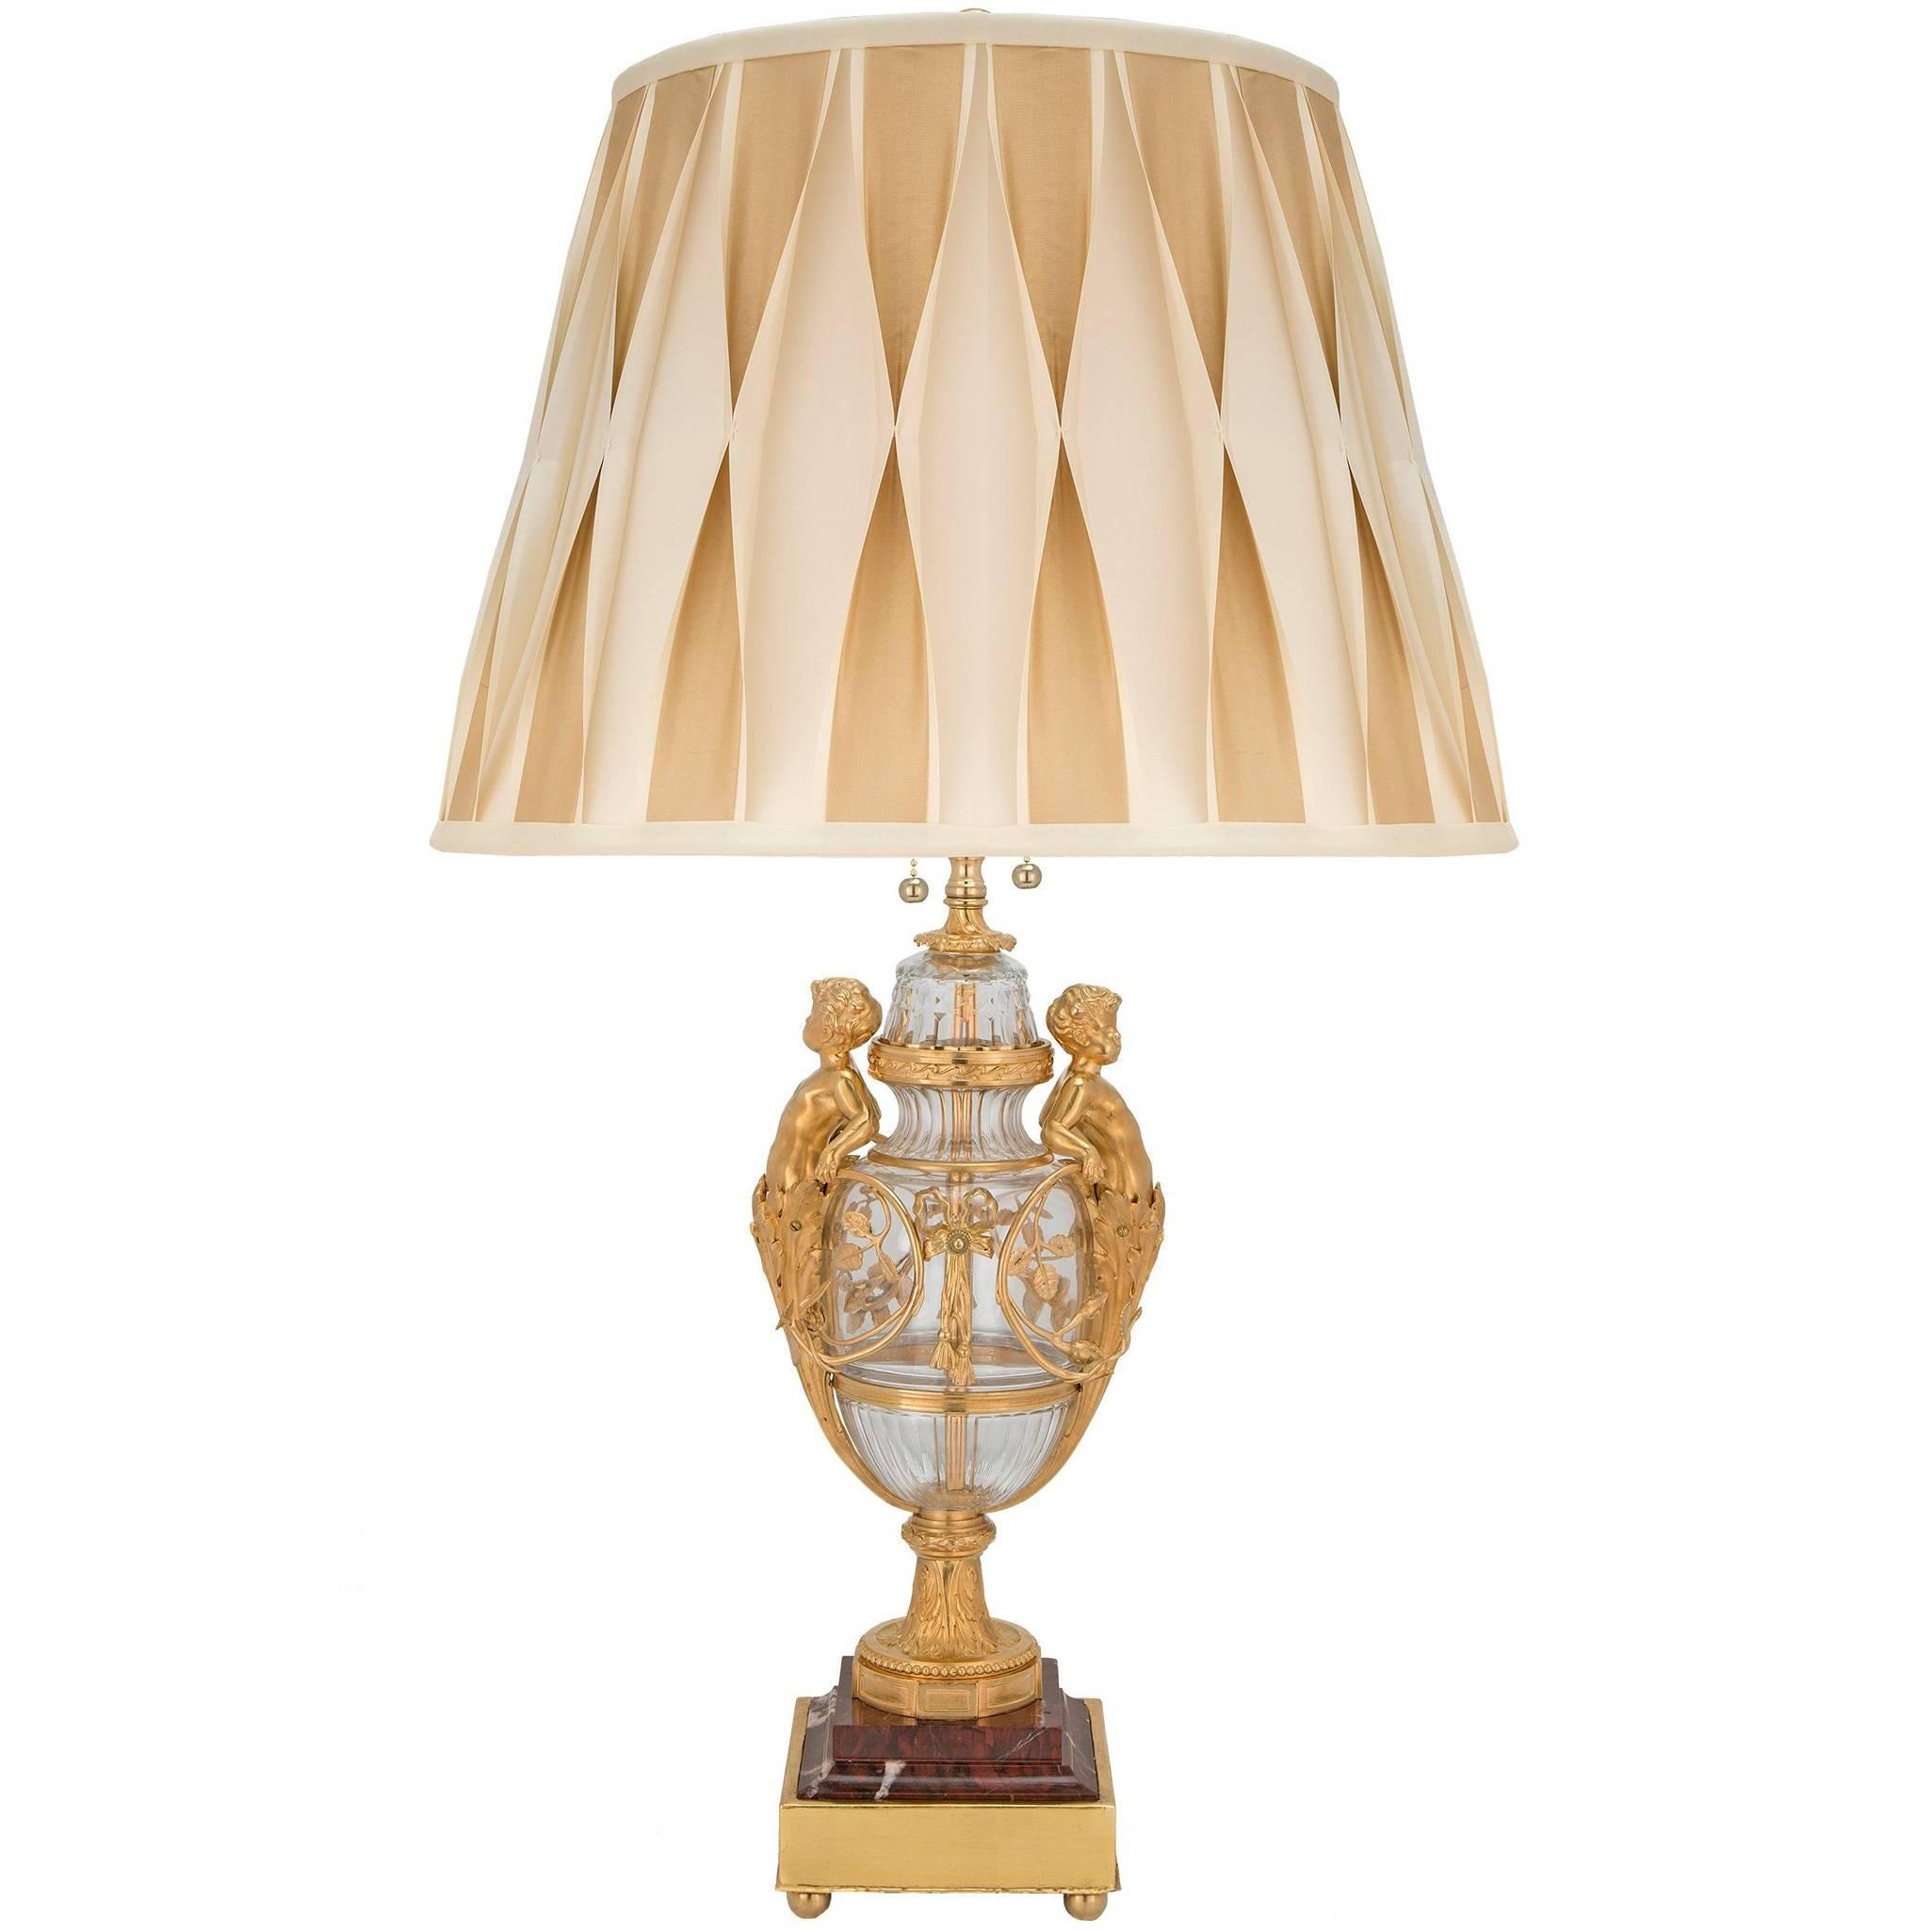 French 19th Century Louis XVI Style Baccarat Crystal and Ormolu Lamp